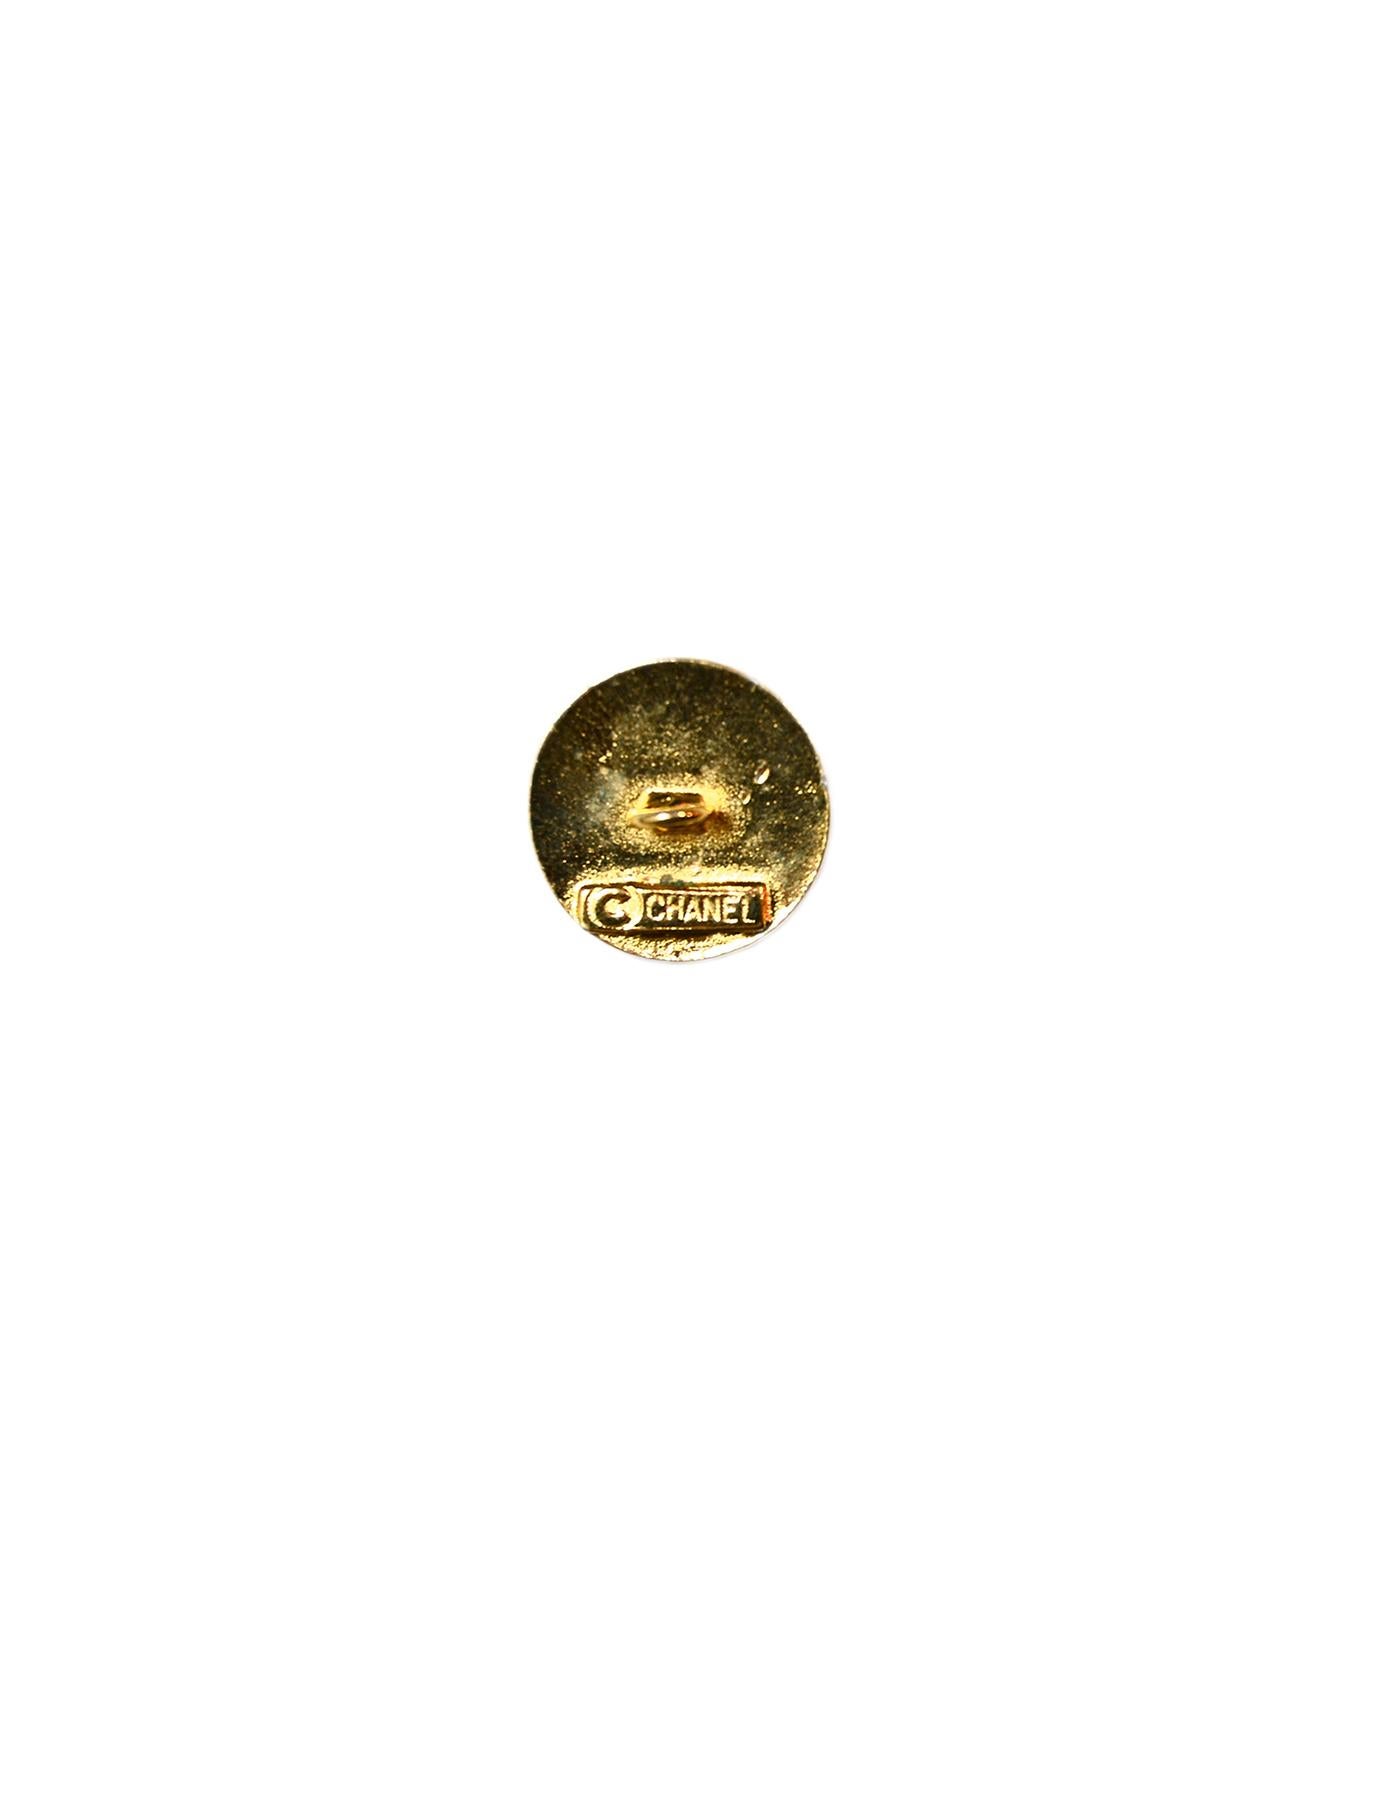 Brown Chanel COCO Goldtone Medium Shank Buttons (Set of 9)